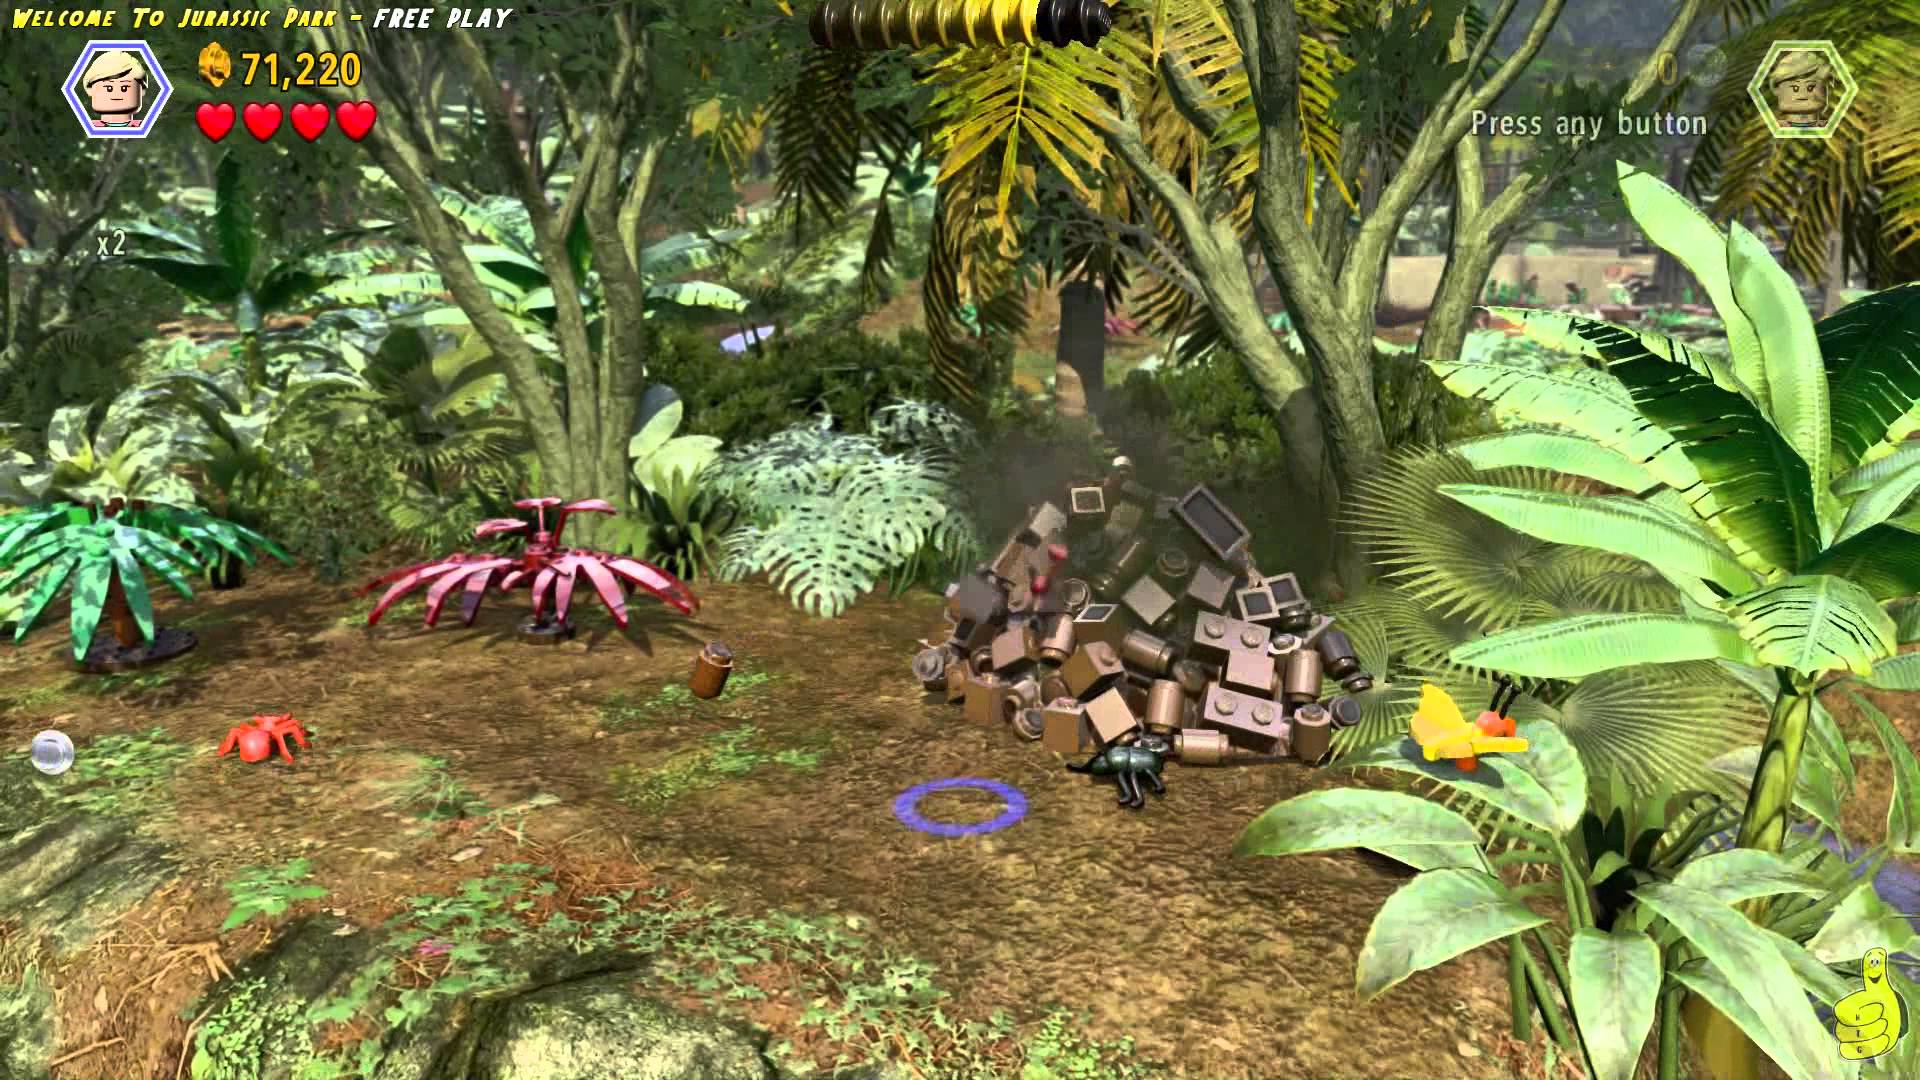 Lego Jurassic World: Level 2 Welcome To Jurassic Park FREE PLAY (All Collectibles) – HTG